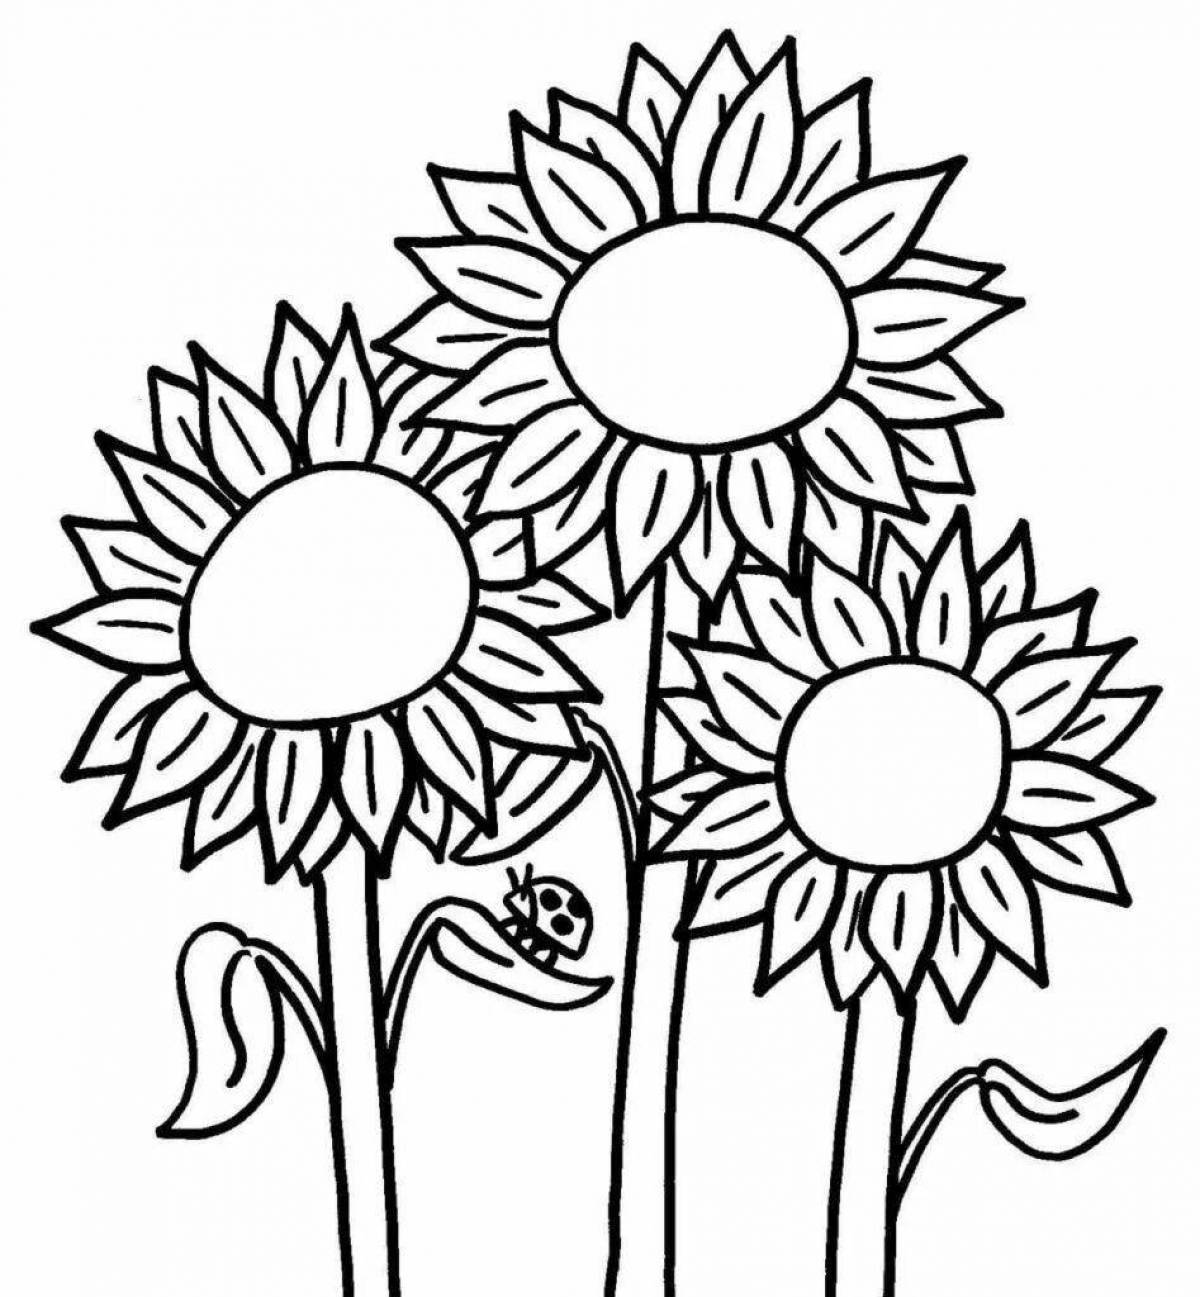 Amazing sunflowers coloring book for kids 2-3 years old